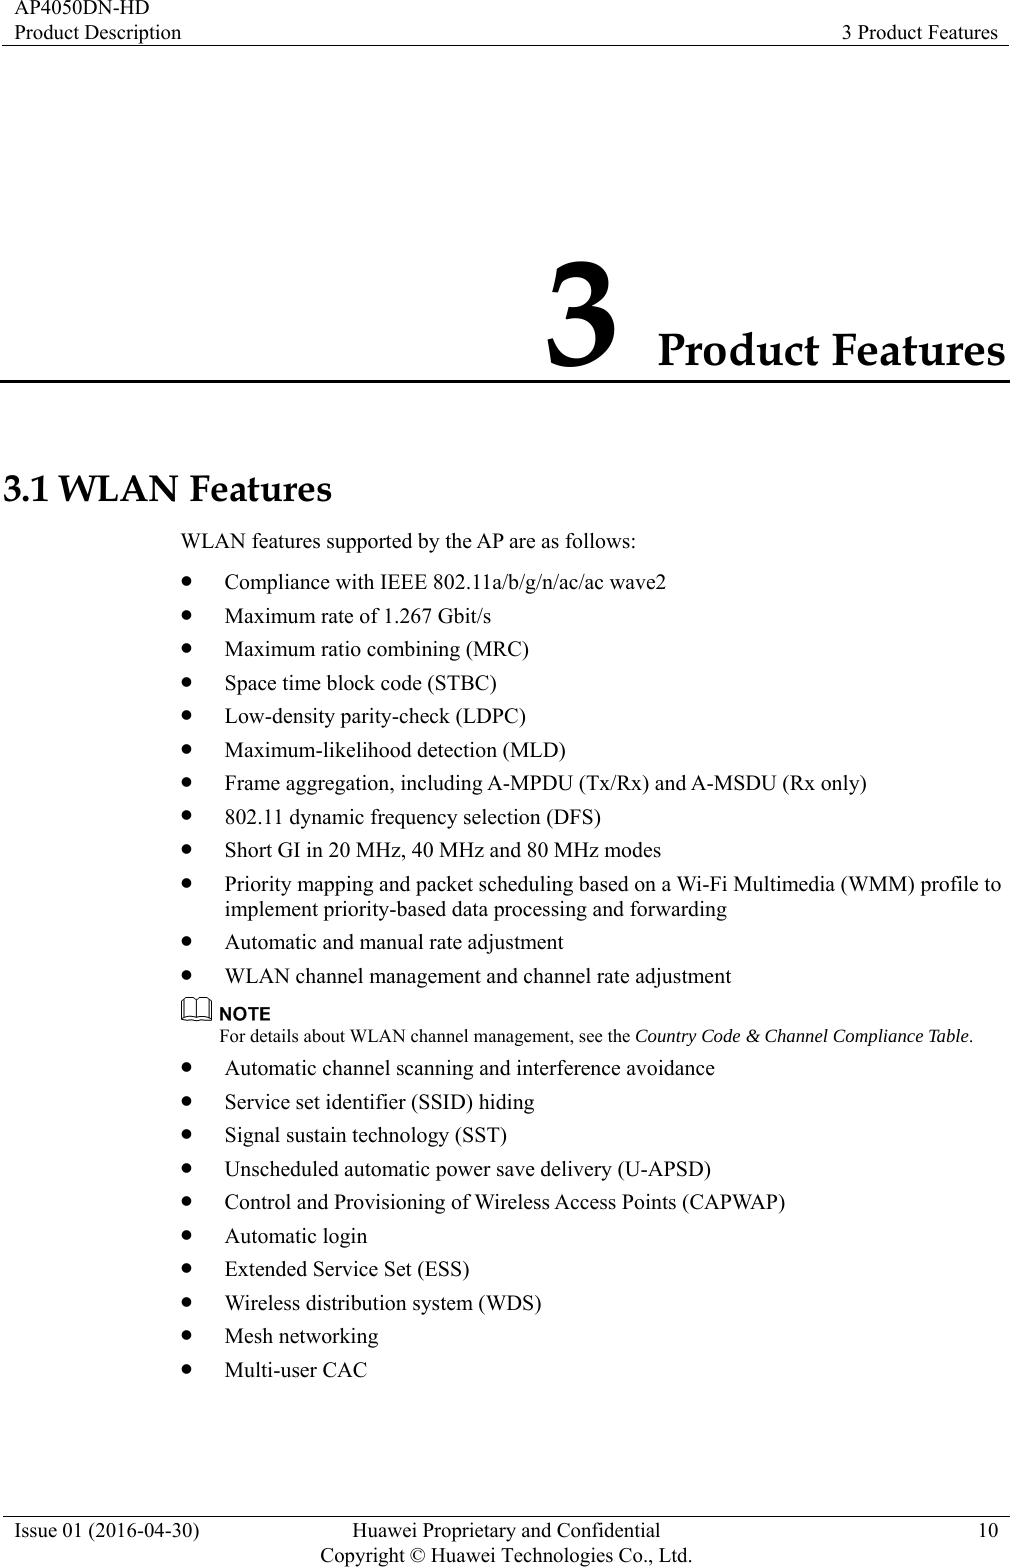 AP4050DN-HD Product Description  3 Product Features Issue 01 (2016-04-30)  Huawei Proprietary and Confidential         Copyright © Huawei Technologies Co., Ltd.10 3 Product Features 3.1 WLAN Features WLAN features supported by the AP are as follows:  Compliance with IEEE 802.11a/b/g/n/ac/ac wave2  Maximum rate of 1.267 Gbit/s  Maximum ratio combining (MRC)  Space time block code (STBC)  Low-density parity-check (LDPC)  Maximum-likelihood detection (MLD)  Frame aggregation, including A-MPDU (Tx/Rx) and A-MSDU (Rx only)  802.11 dynamic frequency selection (DFS)  Short GI in 20 MHz, 40 MHz and 80 MHz modes  Priority mapping and packet scheduling based on a Wi-Fi Multimedia (WMM) profile to implement priority-based data processing and forwarding  Automatic and manual rate adjustment  WLAN channel management and channel rate adjustment  For details about WLAN channel management, see the Country Code &amp; Channel Compliance Table.  Automatic channel scanning and interference avoidance  Service set identifier (SSID) hiding  Signal sustain technology (SST)  Unscheduled automatic power save delivery (U-APSD)  Control and Provisioning of Wireless Access Points (CAPWAP)  Automatic login  Extended Service Set (ESS)  Wireless distribution system (WDS)  Mesh networking  Multi-user CAC 